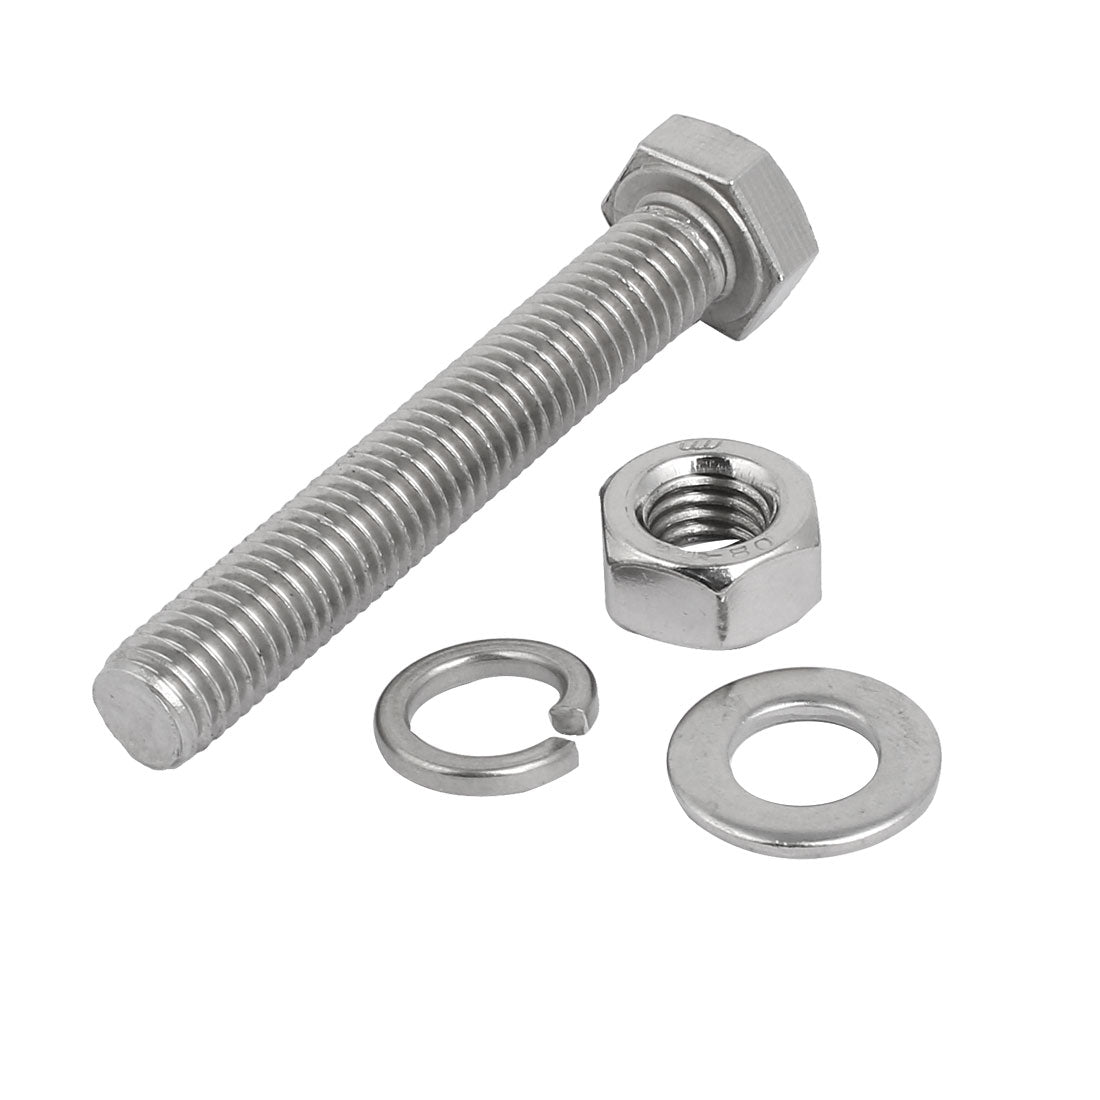 uxcell Uxcell 5 Set M10x65mm 304 Stainless Steel Hex Bolts w Nuts and Washers Assortment Kit